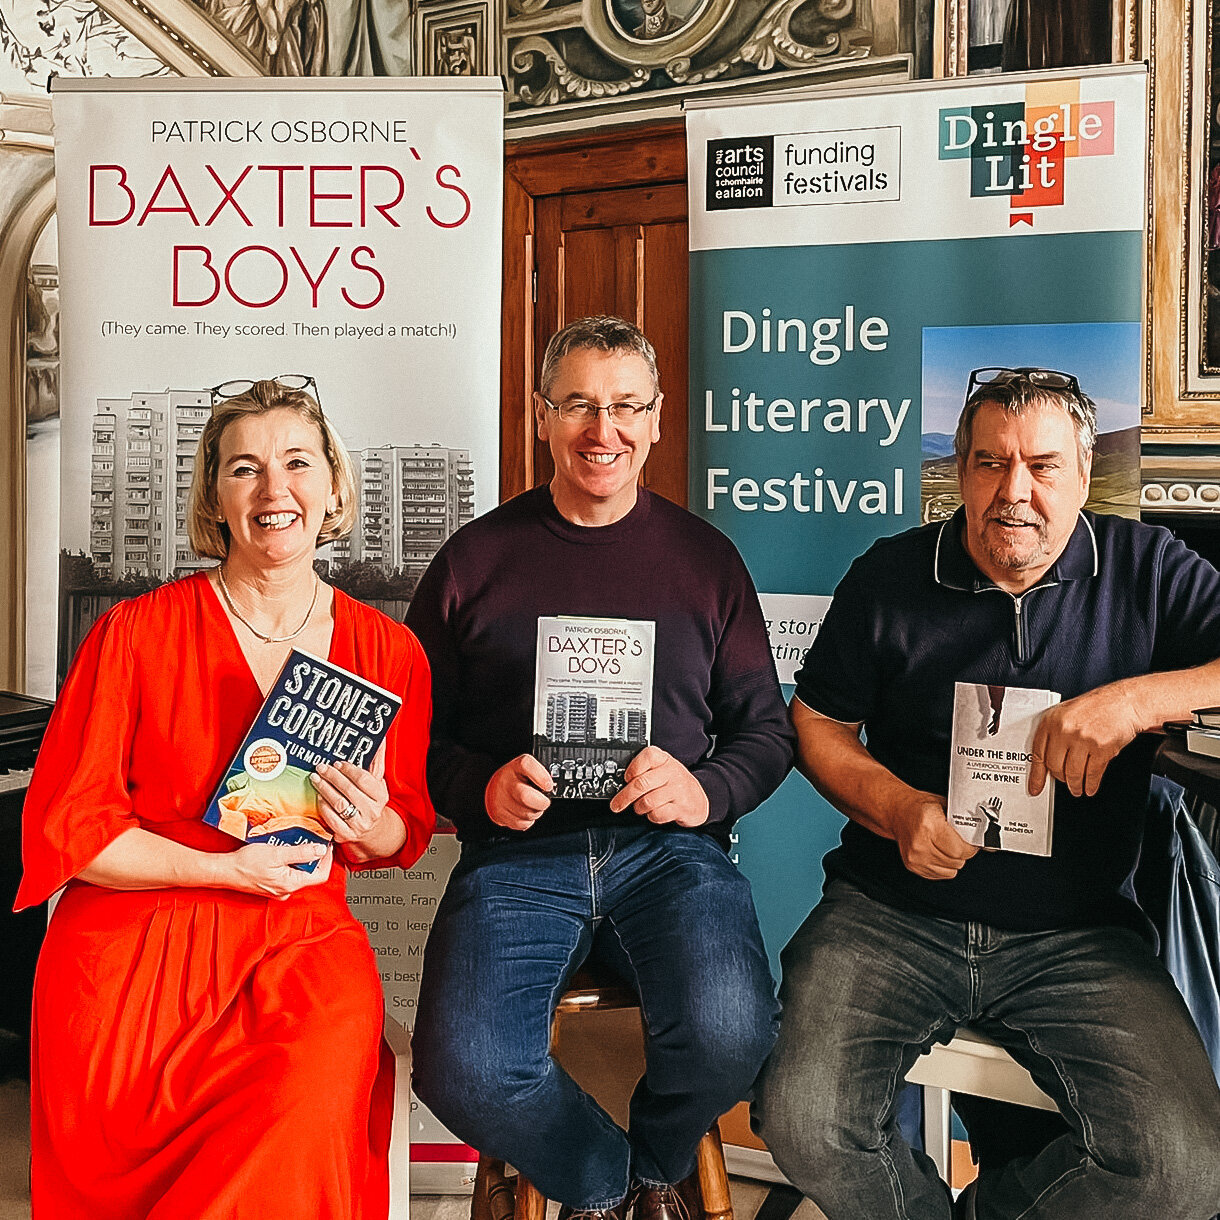 What a wonderful weekend at @dingle.lit !

I had a great time catching up with Patrick Osborne and Jack Byrne, discussing our writing journeys and observations of the numerous social, religious and political unrest in our home cities. 

It was a week